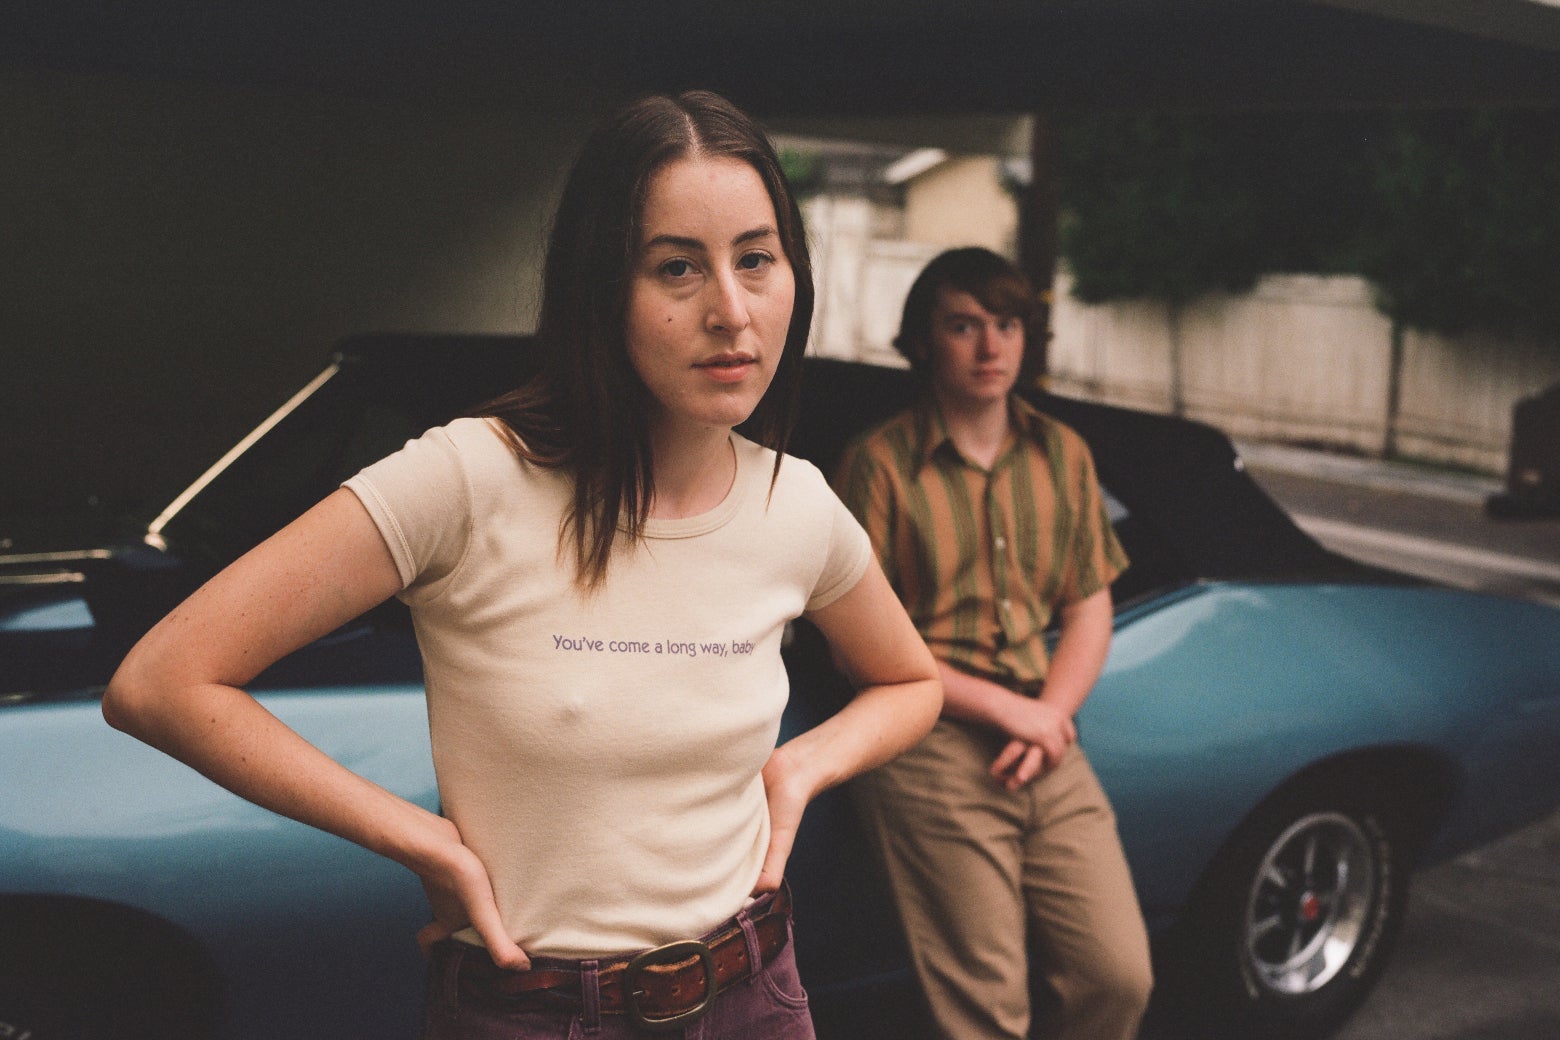 She wears an off-white t-shirt and purple cords and looks defiantly at the camera. In the background, out of focus, he leans against a car, in a very '70s buttondown and khakis, his hands casually crossed over the front of his pants.